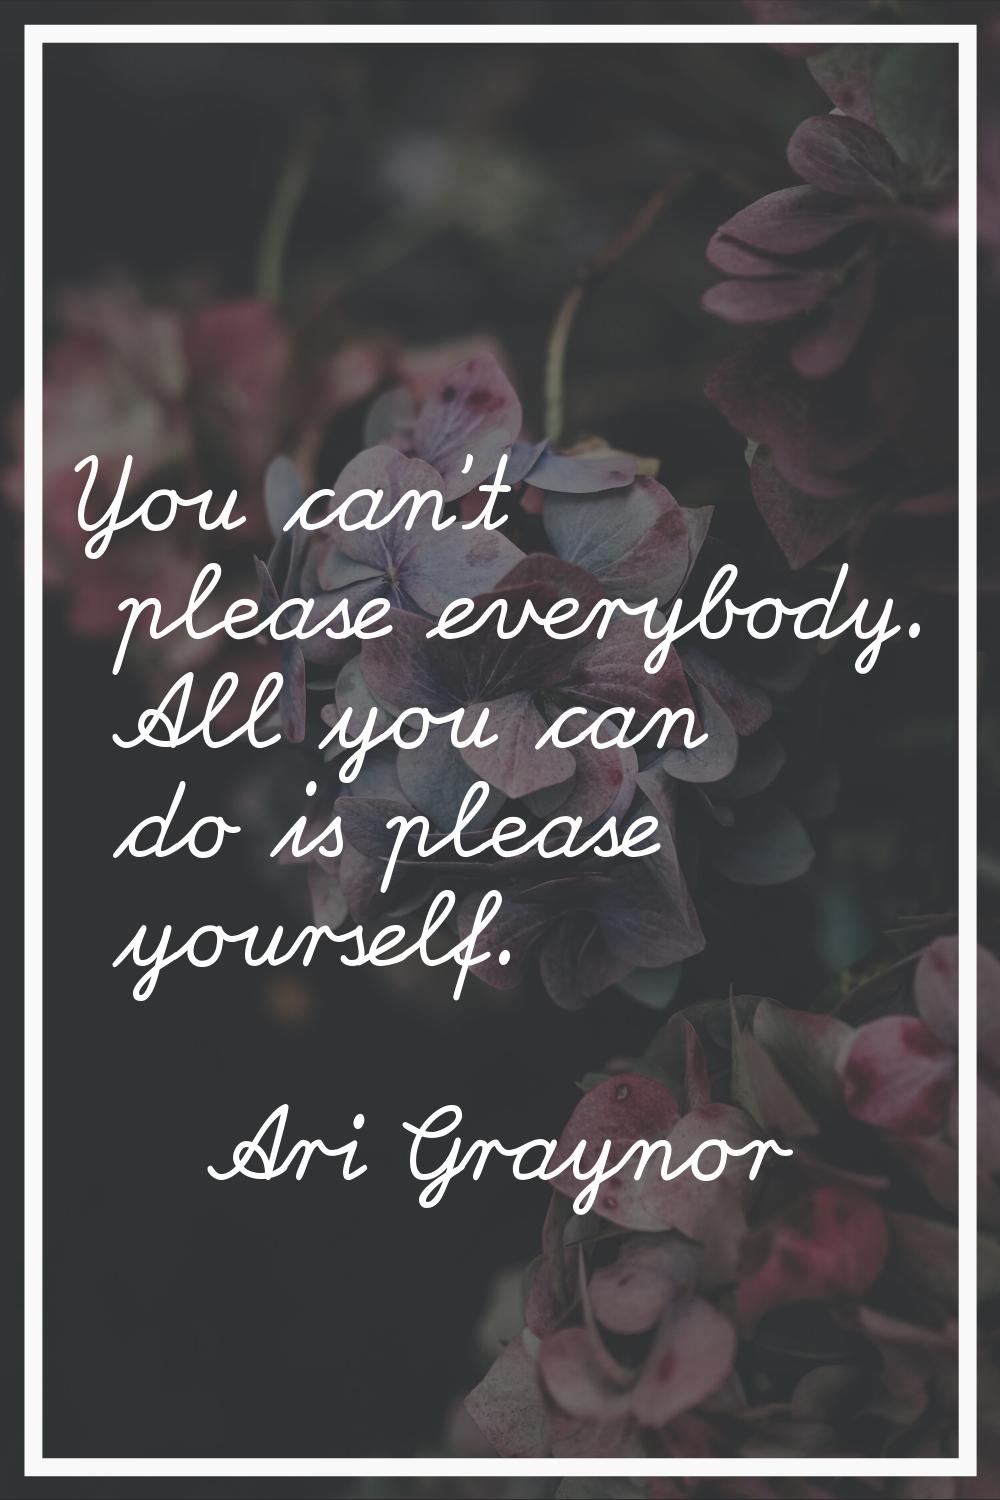 You can't please everybody. All you can do is please yourself.